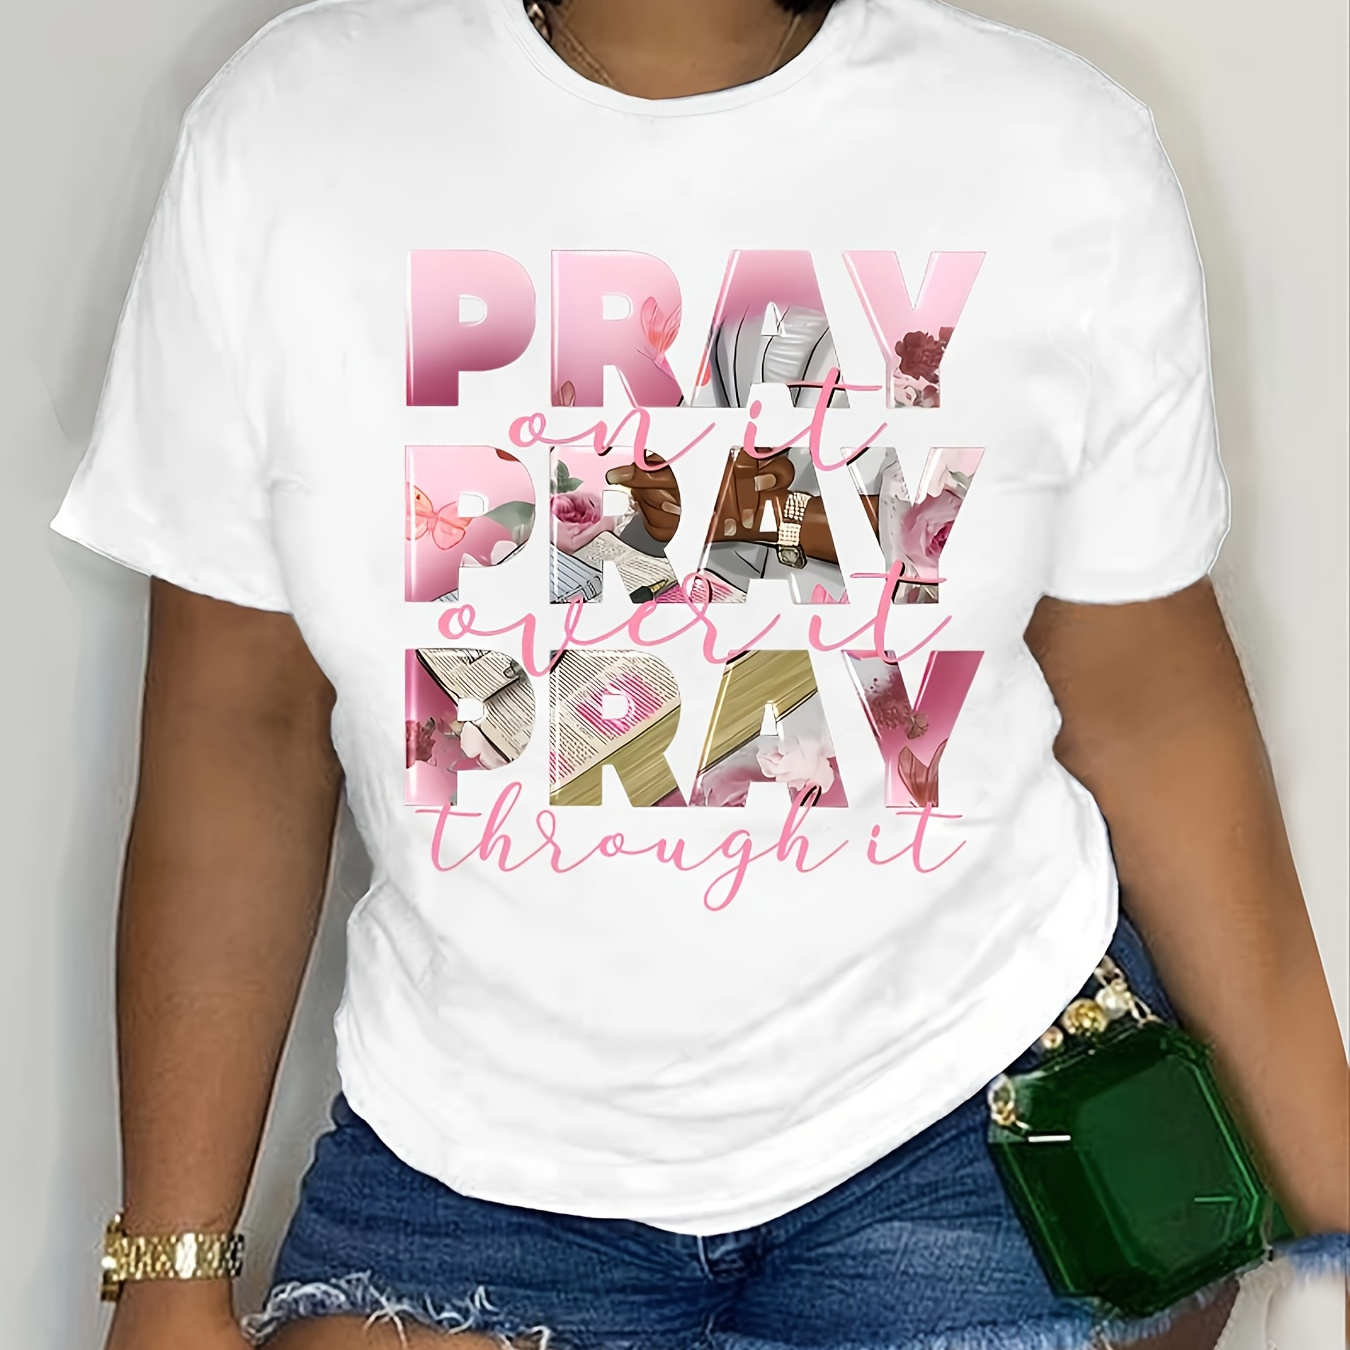 

Plus Size Letter Pray Print T-shirt, Casual Short Sleeve Top For Spring & Summer, Women's Plus Size Clothing